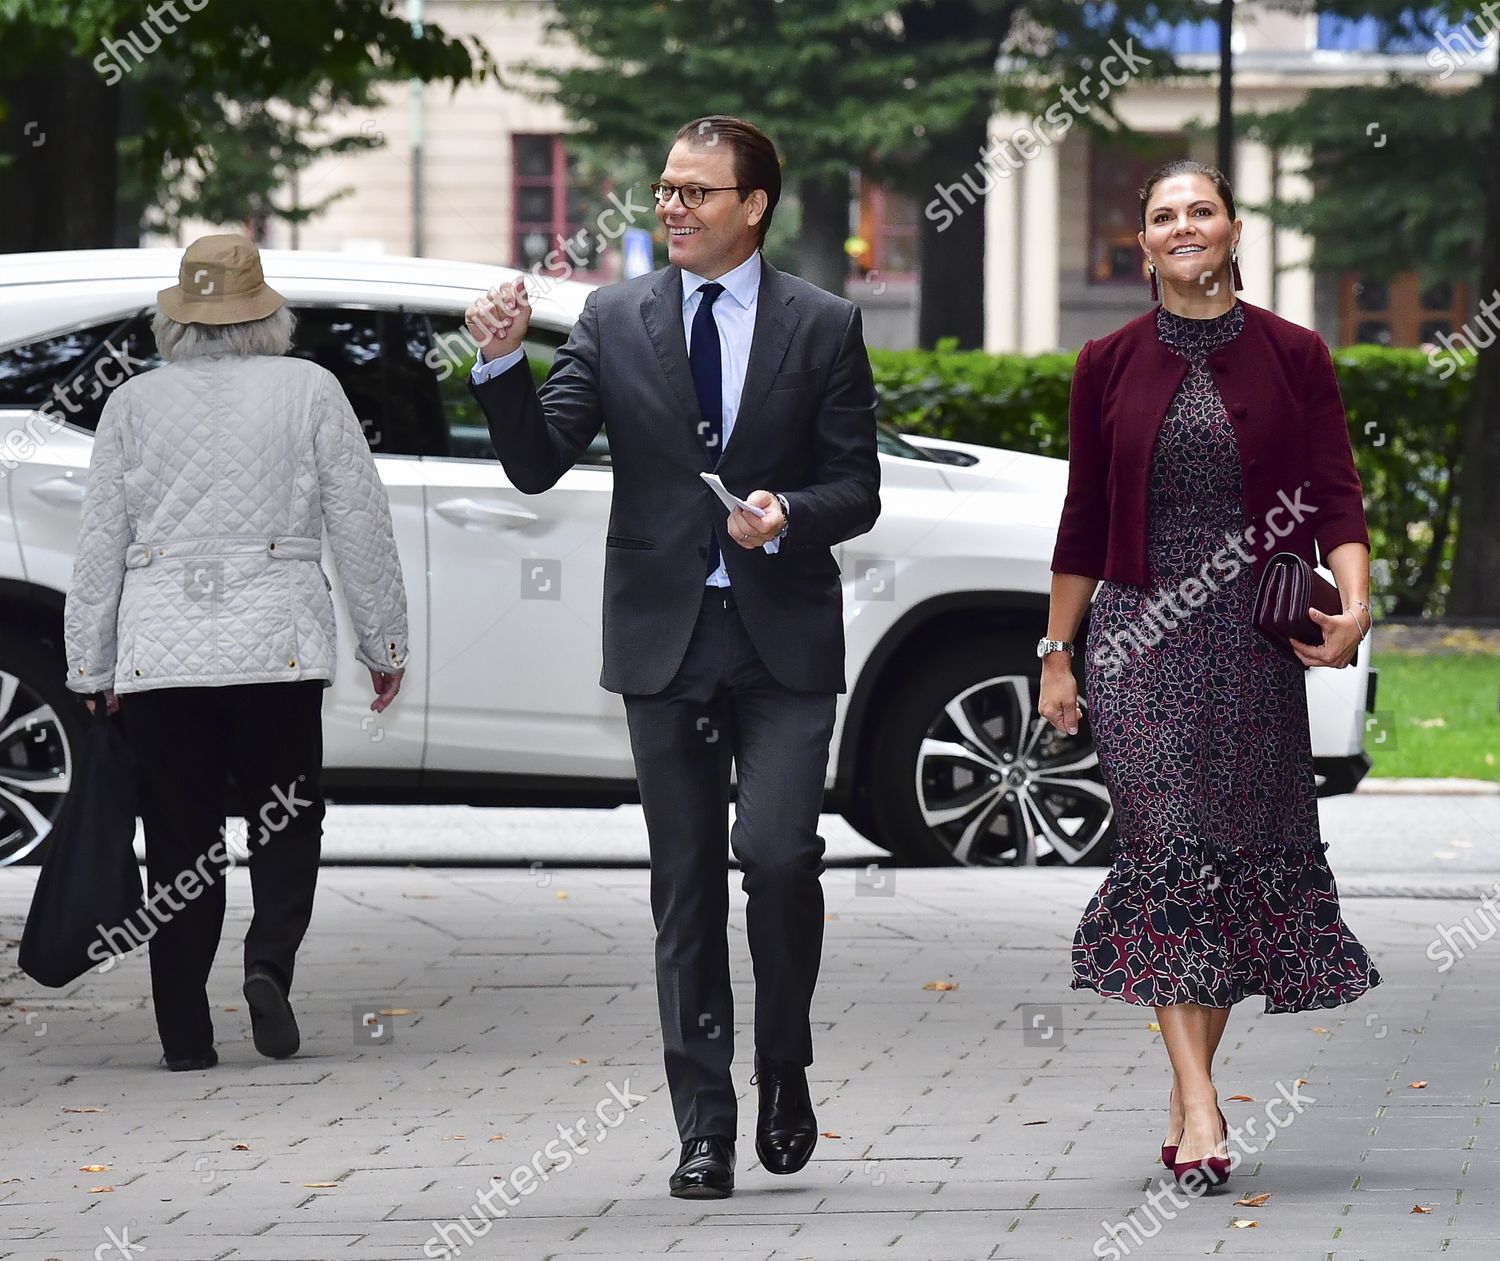 prince-daniel-and-crown-princess-victoria-visit-the-maxim-theater-stockholm-sweden-shutterstock-editorial-10817556a.jpg